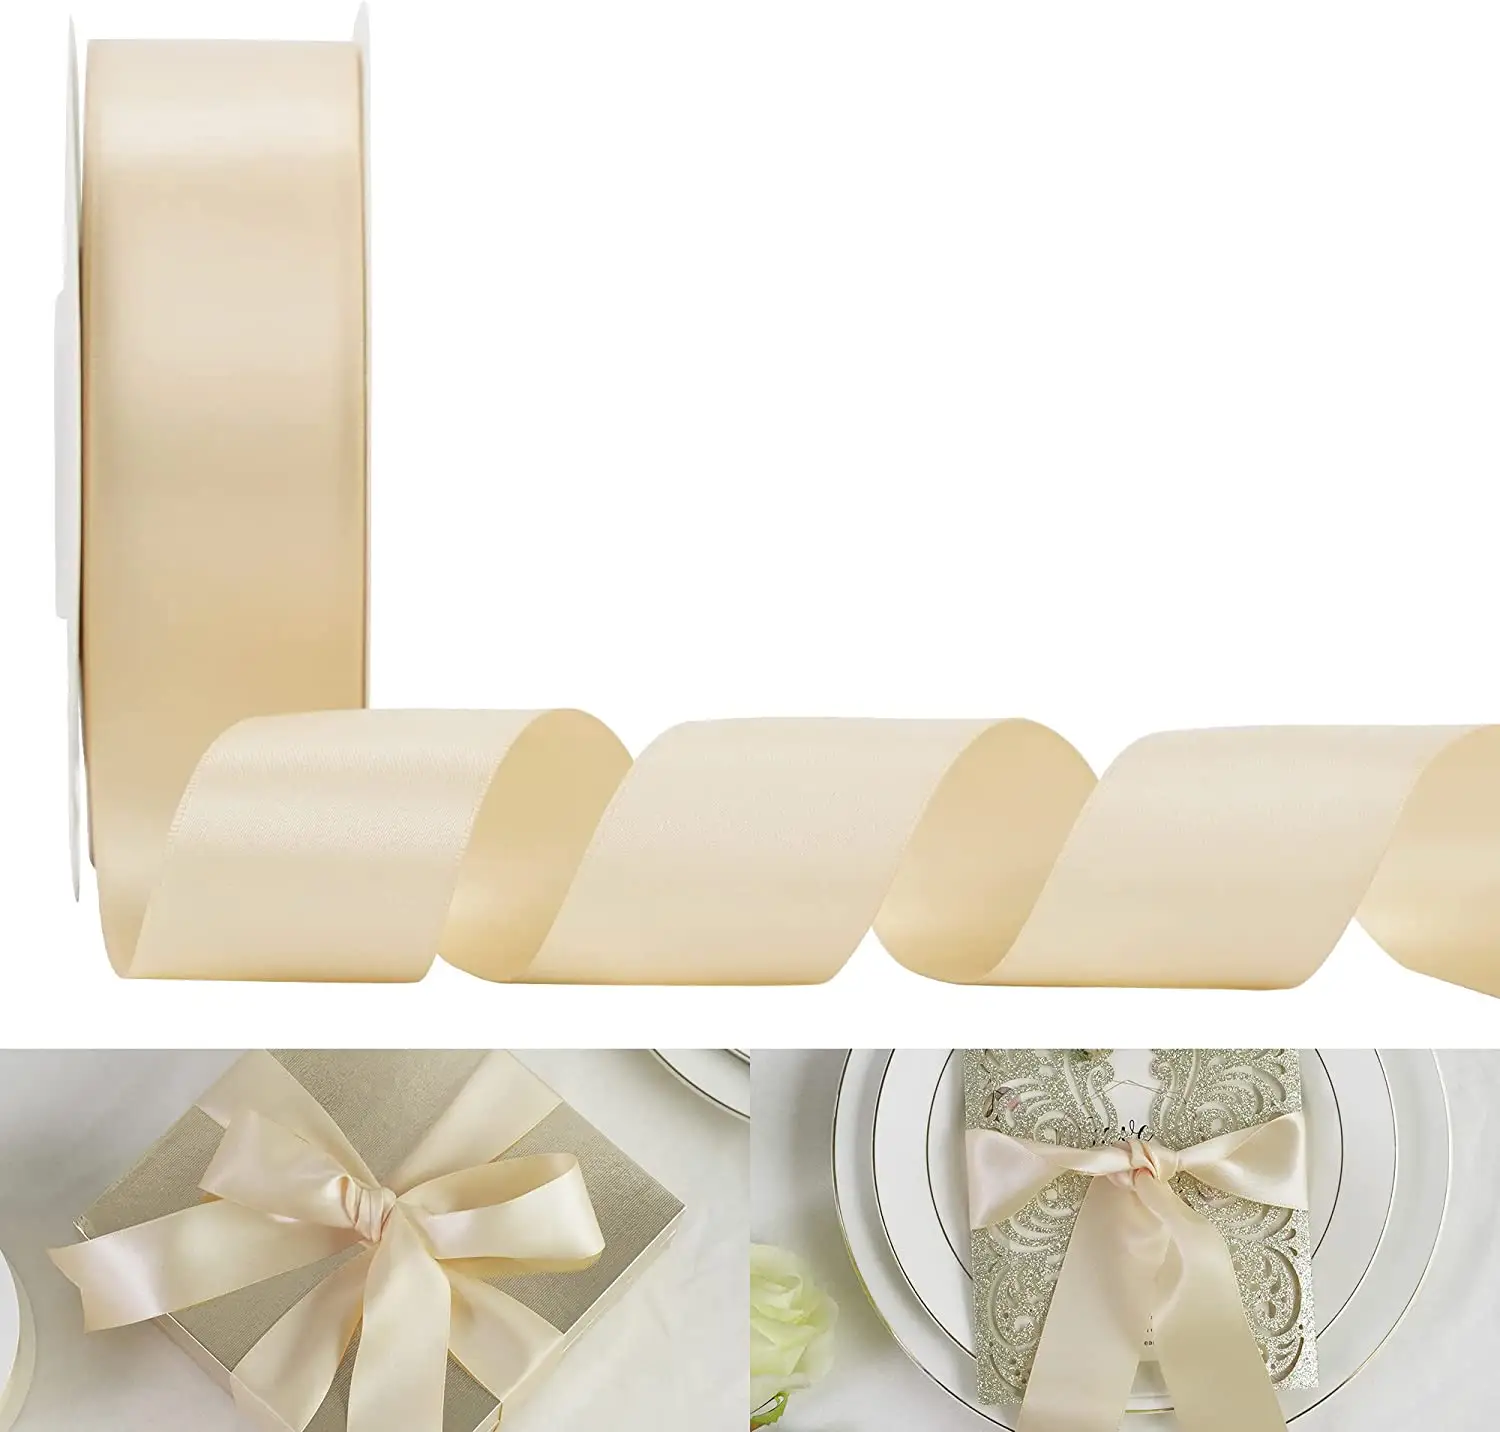 1.5 Inch Wide Satin Ribbon 50 Yards Light Champagne Double Face Polyester Silk Satin Ribbon For Gift Wrapping